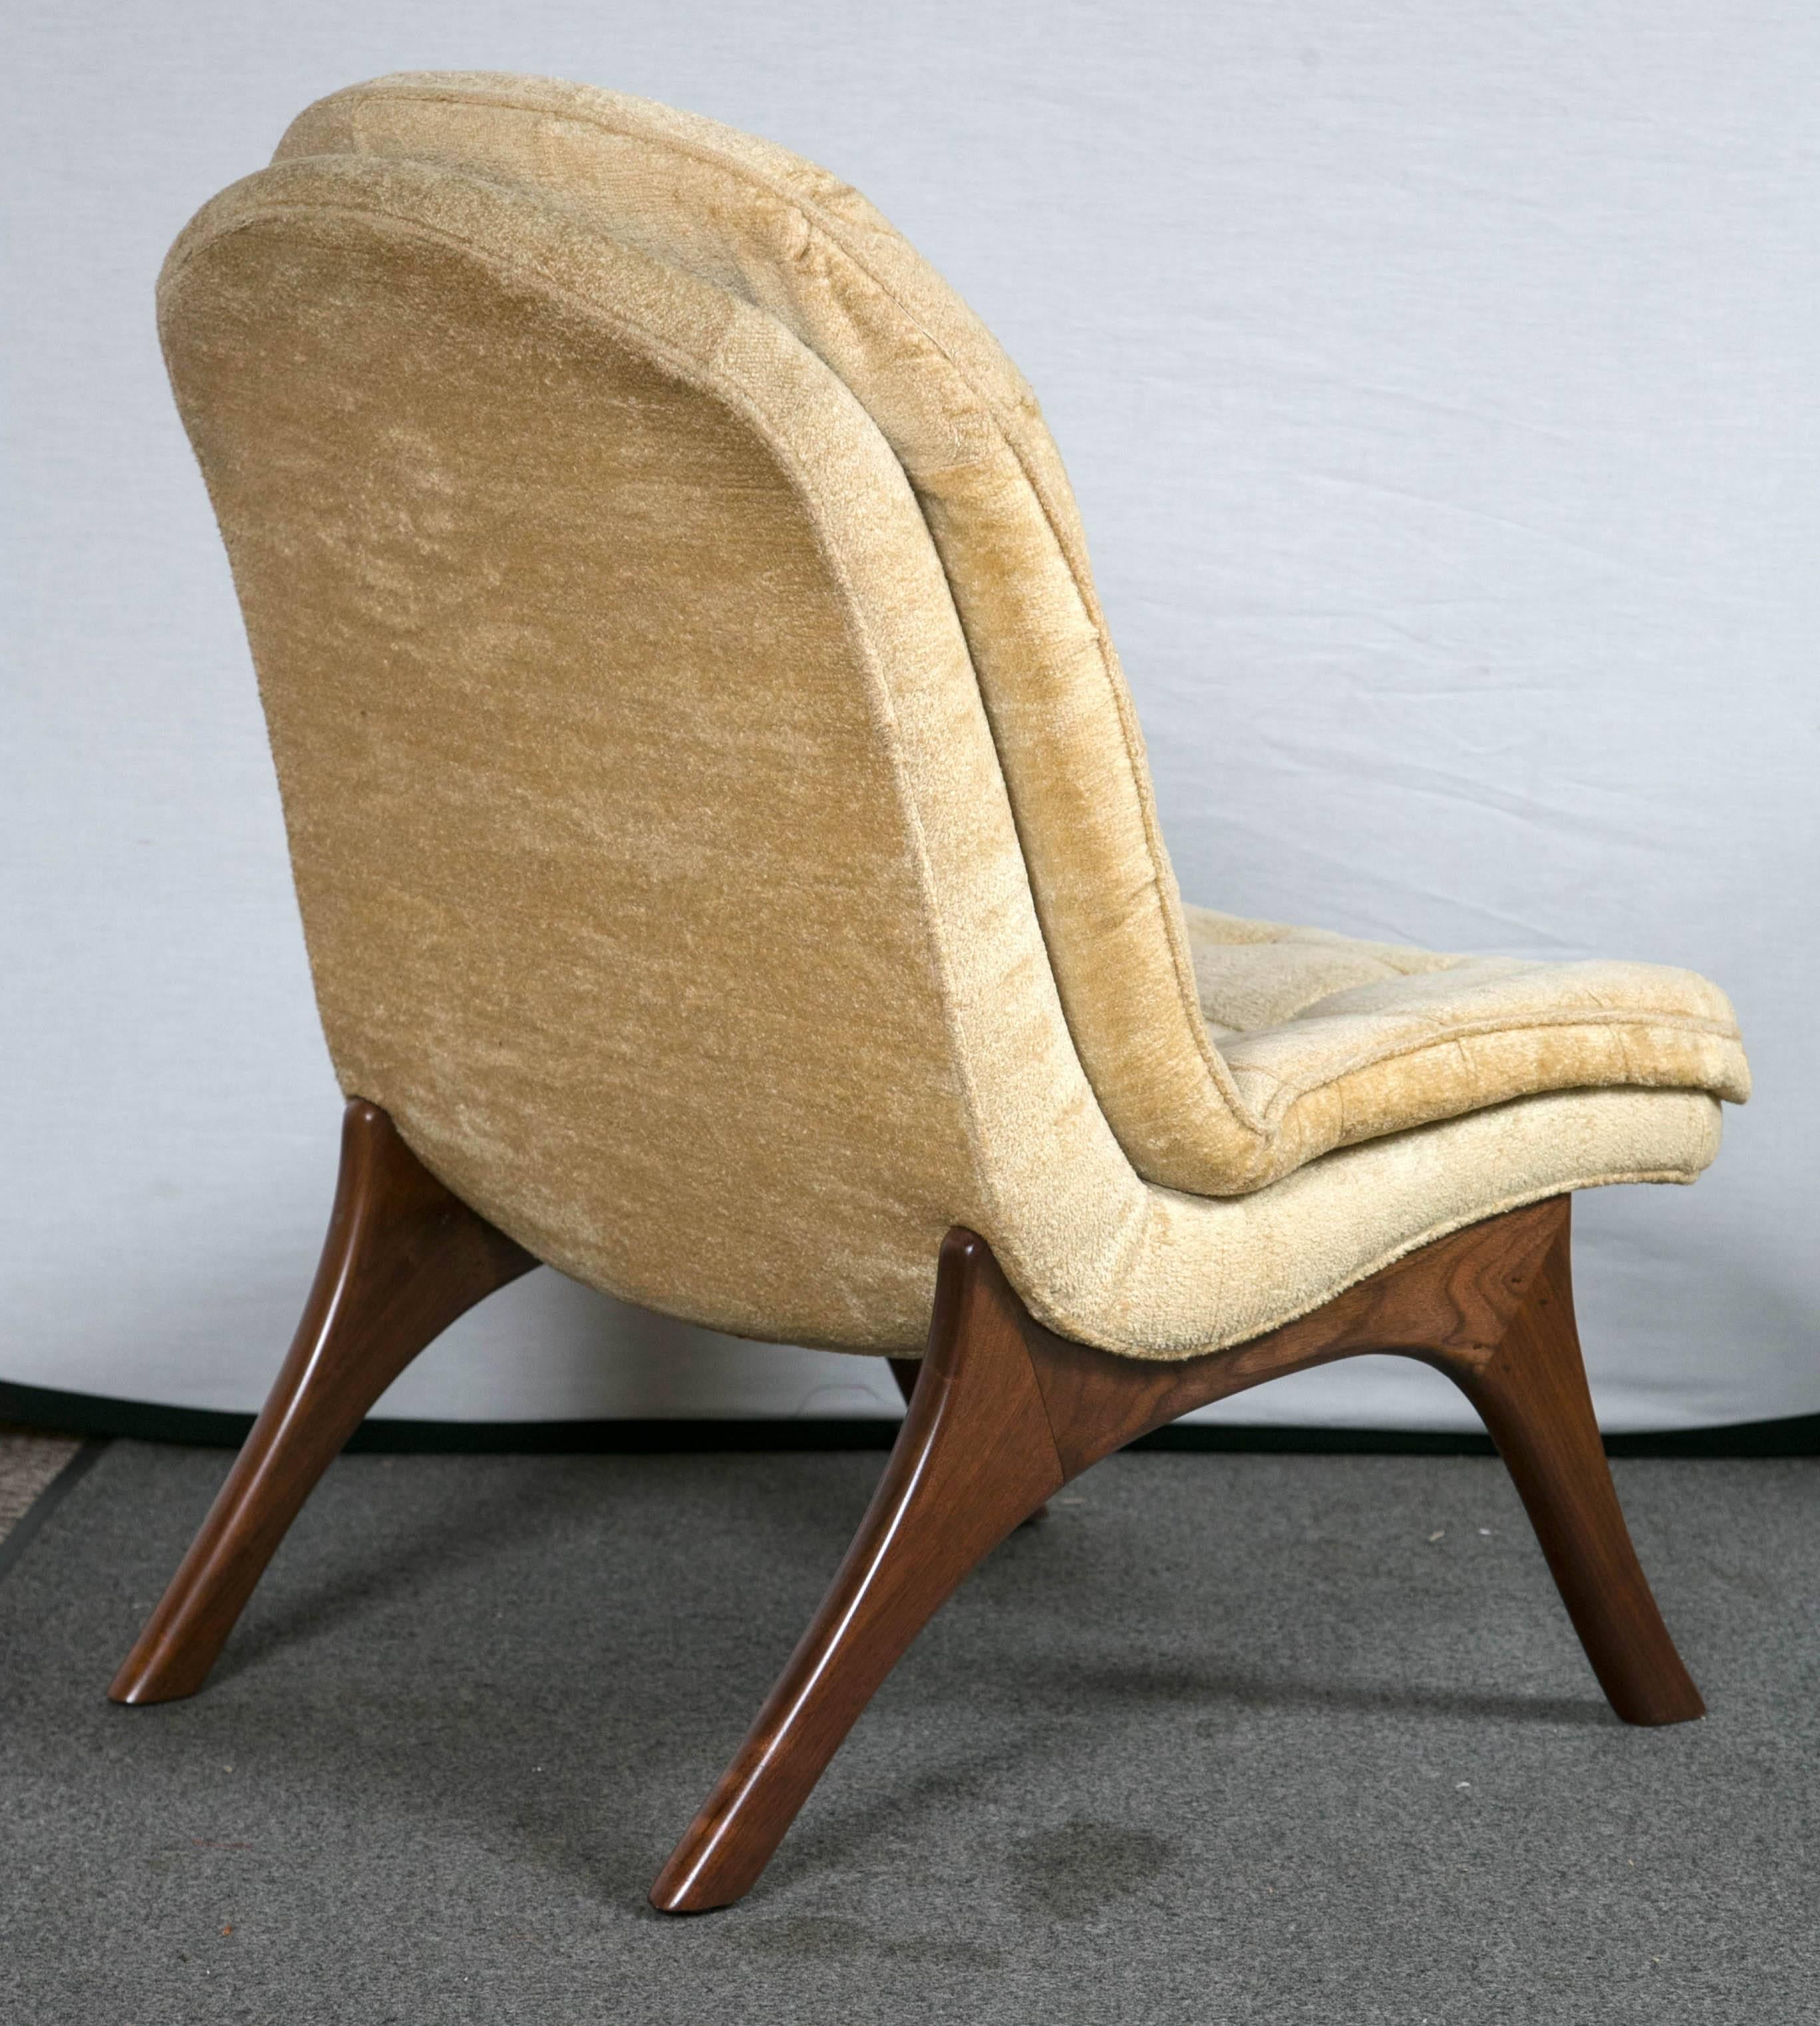 Pair of Adrian Pearsall for Craft Associates Slipper Chairs In Excellent Condition For Sale In Stamford, CT